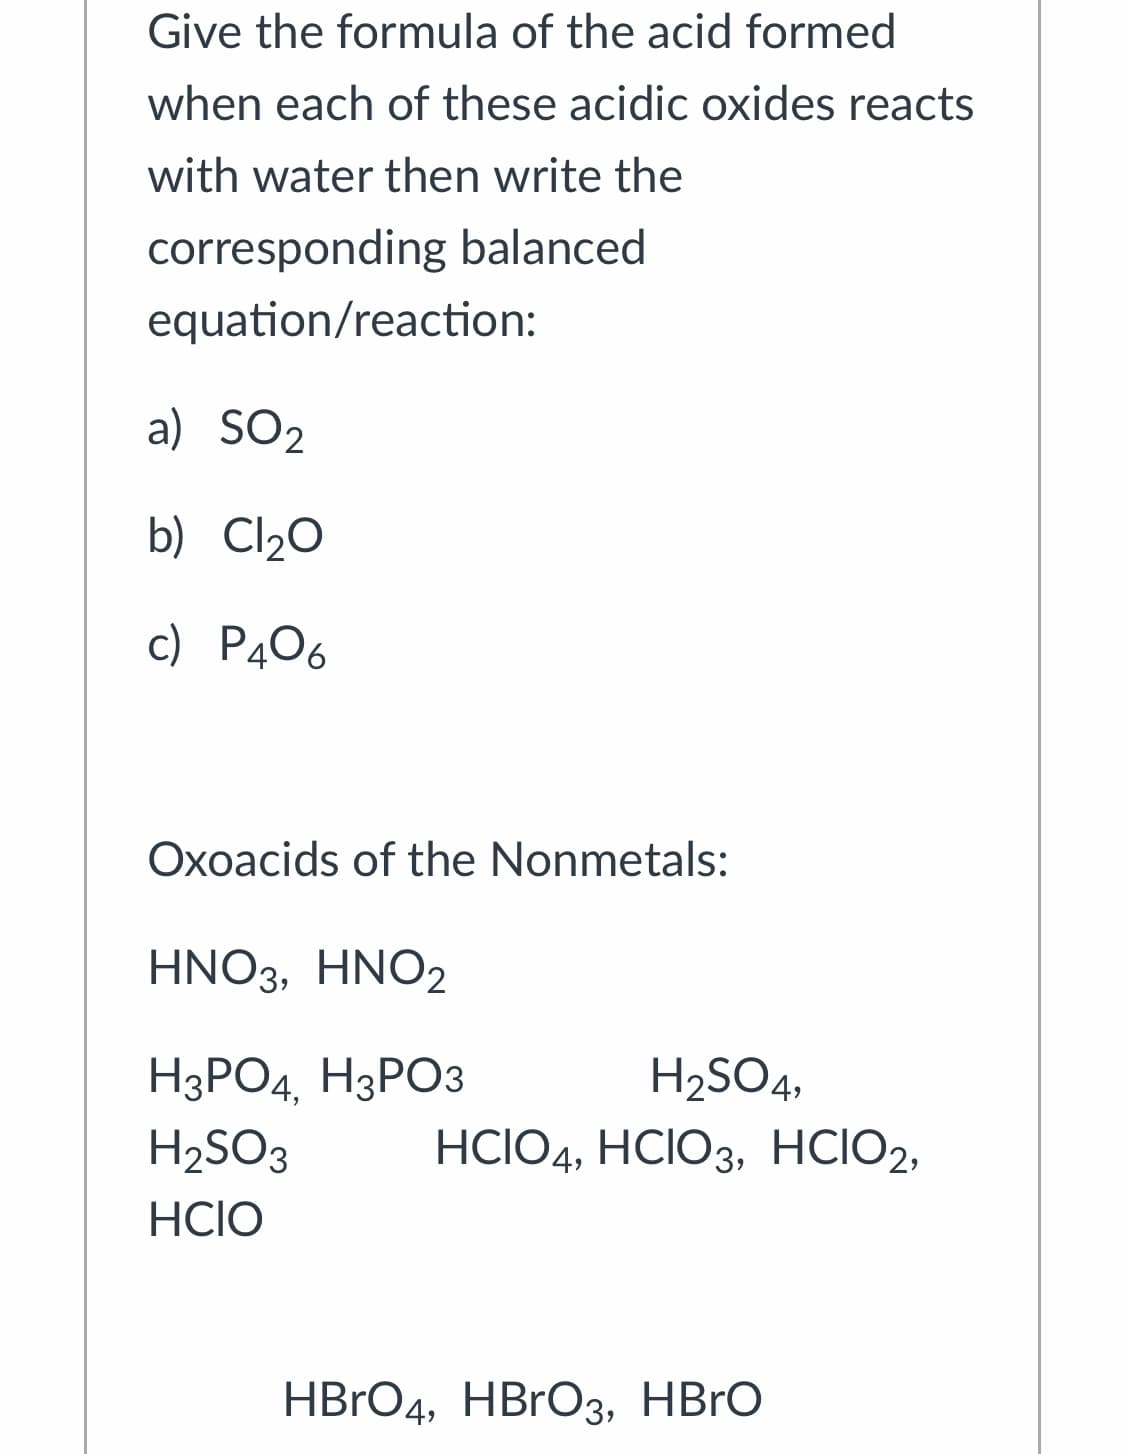 Give the formula of the acid formed
when each of these acidic oxides reacts
with water then write the
corresponding balanced
equation/reaction:
a) SO2
b) Cl20
c) P406
Oxoacids of the Nonmetals:
HNO3, HNO2
НаРОд, НЗРОЗ
H2SO4,
H2SO3
HCIO4, HCIO3, HCIO2,
HCIO
HBrОд, НBrOз, HBrO
